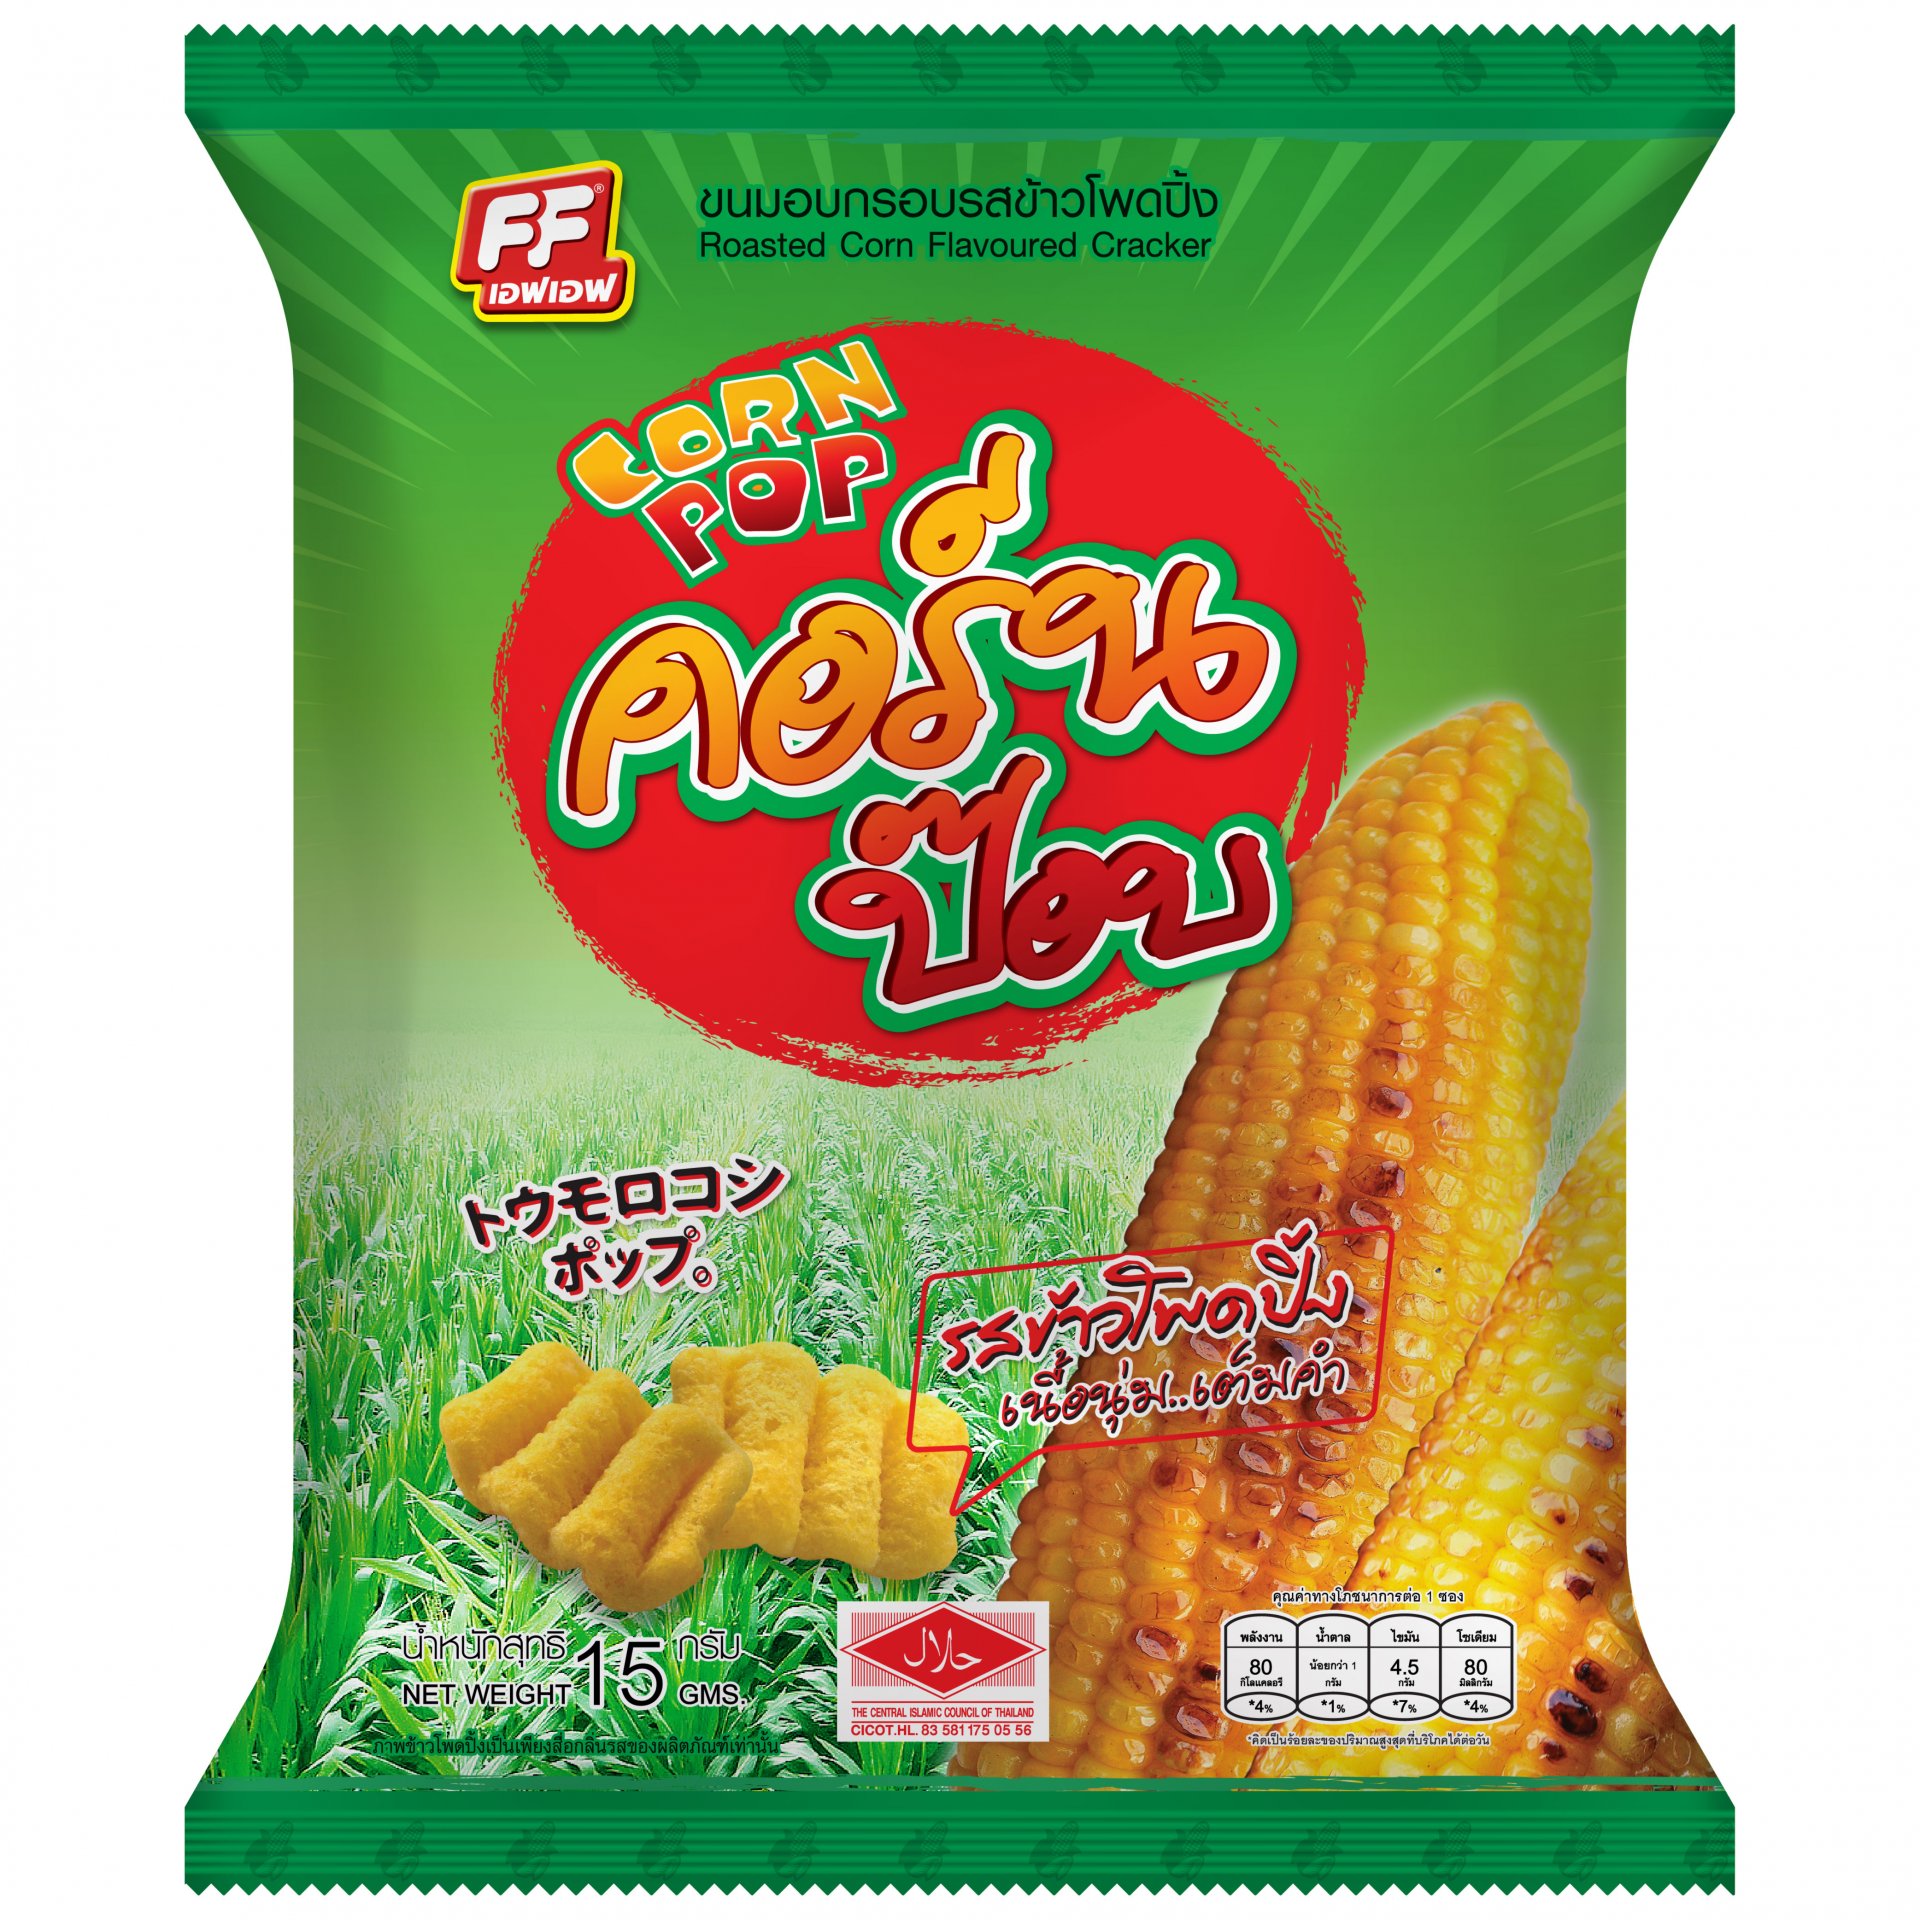 Roasted Corn Flavoured